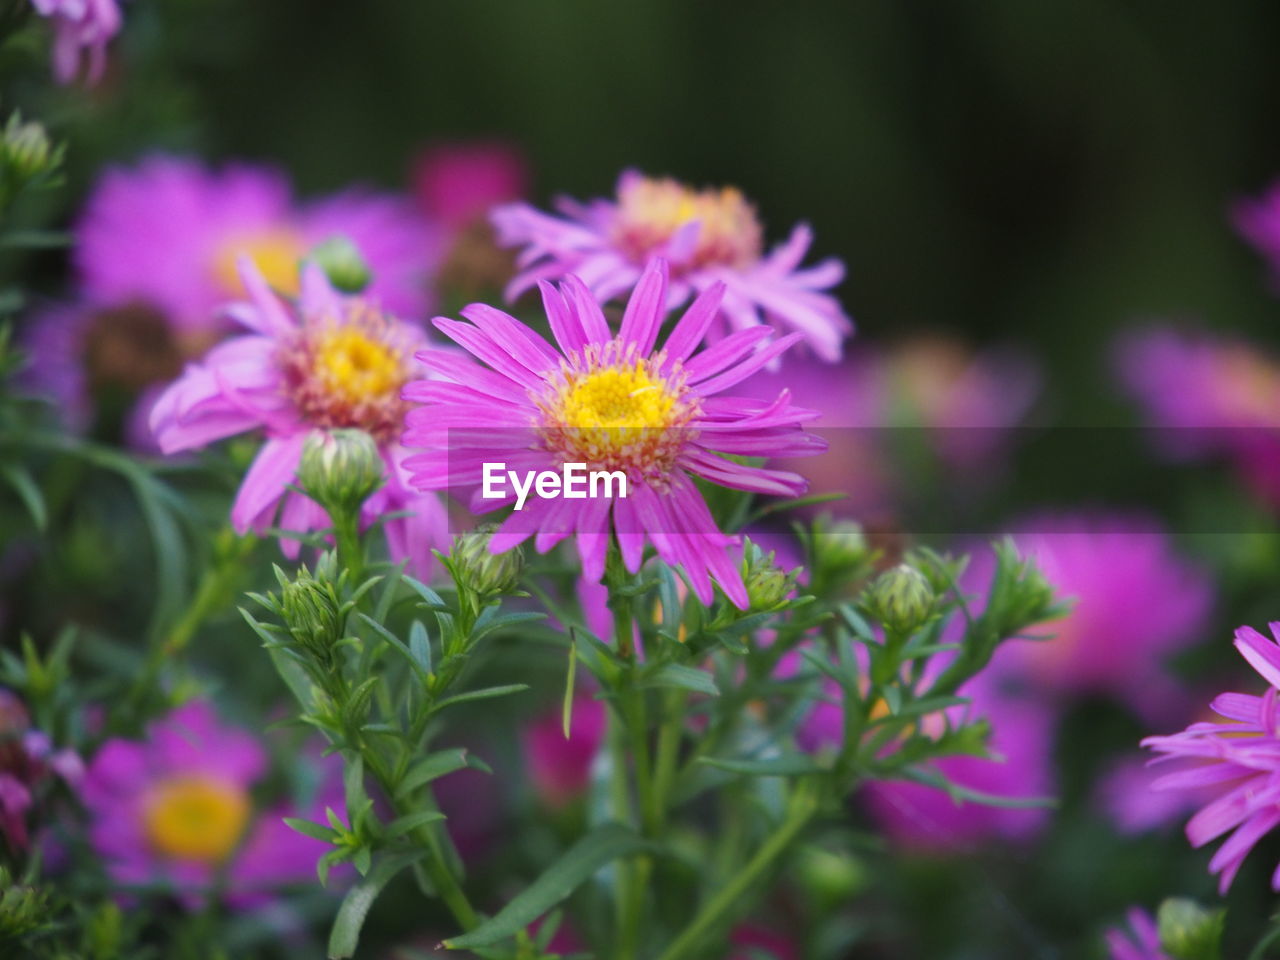 flower, flowering plant, plant, freshness, beauty in nature, close-up, nature, purple, pink, flower head, growth, fragility, aster, garden cosmos, petal, inflorescence, no people, meadow, macro photography, multi colored, selective focus, summer, medicine, wildflower, outdoors, magenta, botany, focus on foreground, garden, animal wildlife, yellow, plant part, food, day, food and drink, ornamental garden